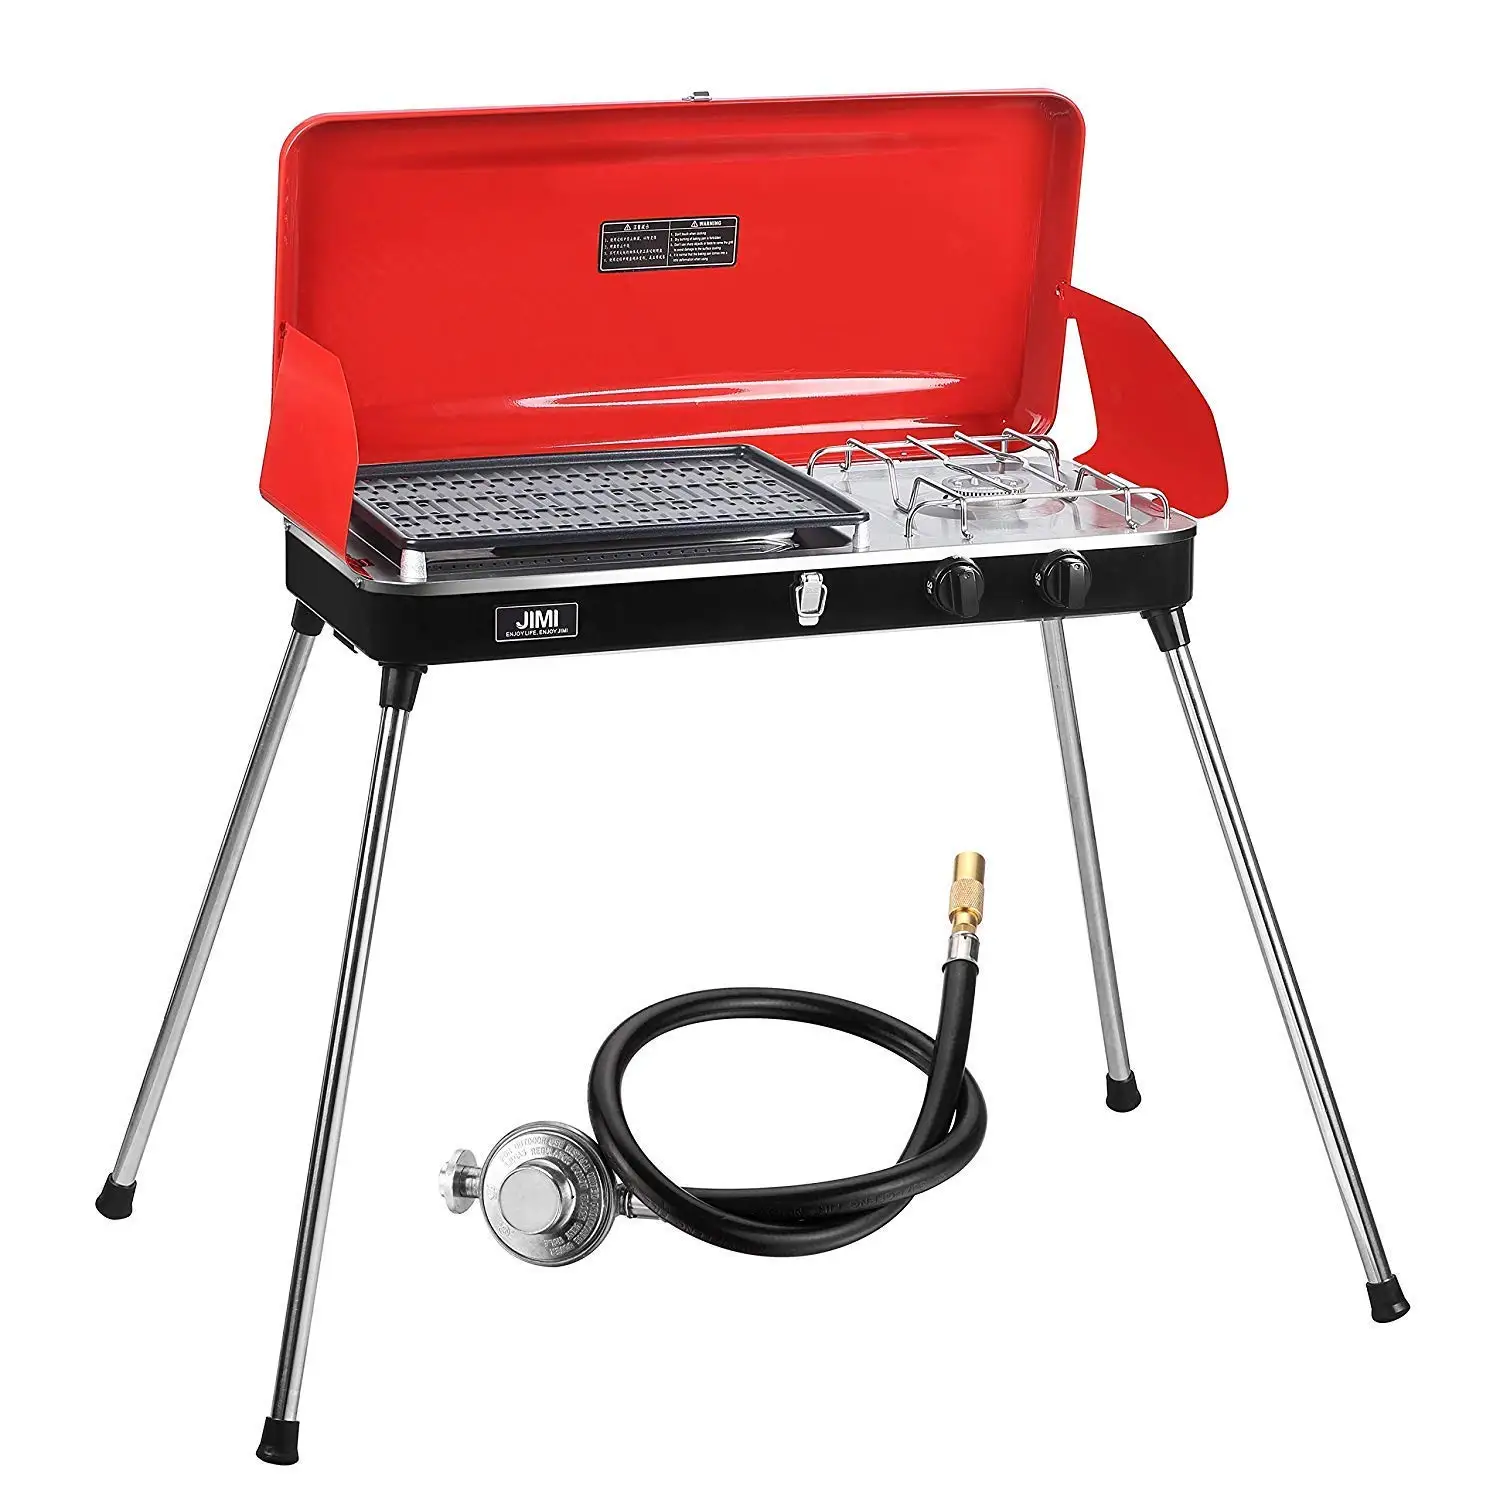 Cheap Gas Grill For Camping Find Gas Grill For Camping Deals On Line At Alibaba Com,What Does An Ionizer Do